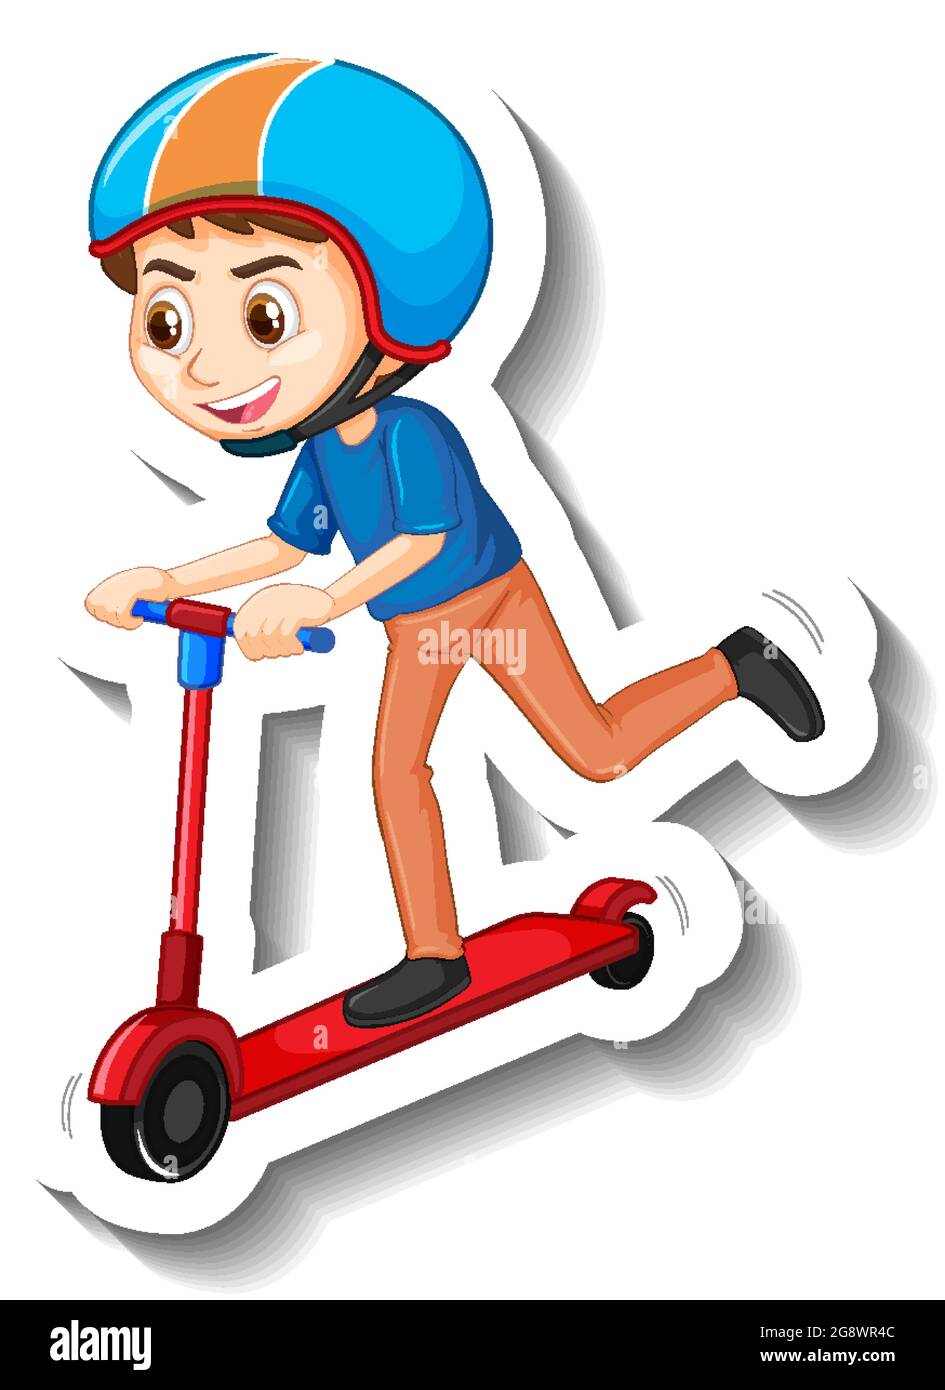 A boy riding scooter cartoon character sticker illustration Stock Vector